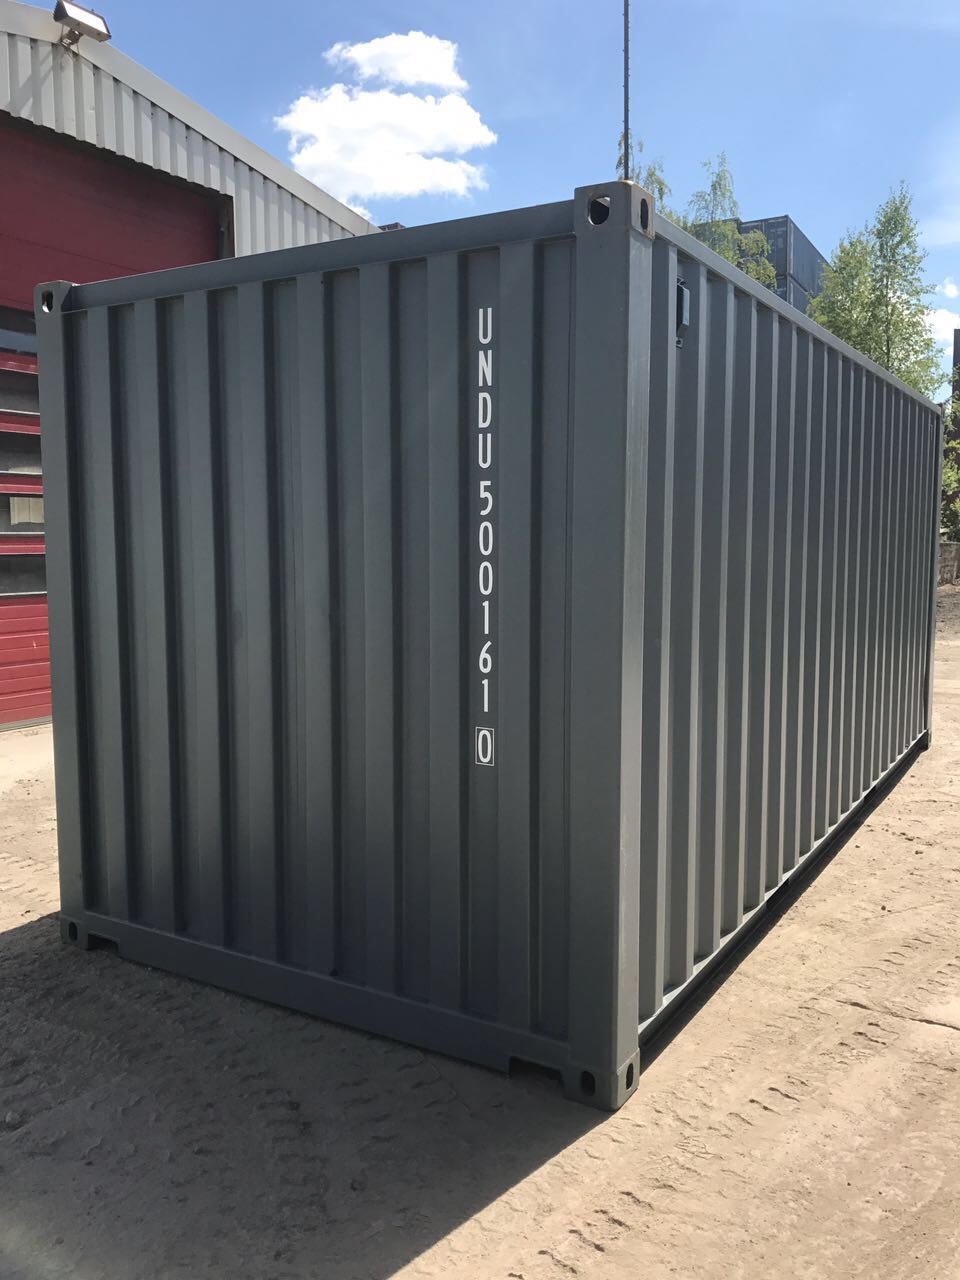 Angebot 22 Seecontainer 20 Fuß